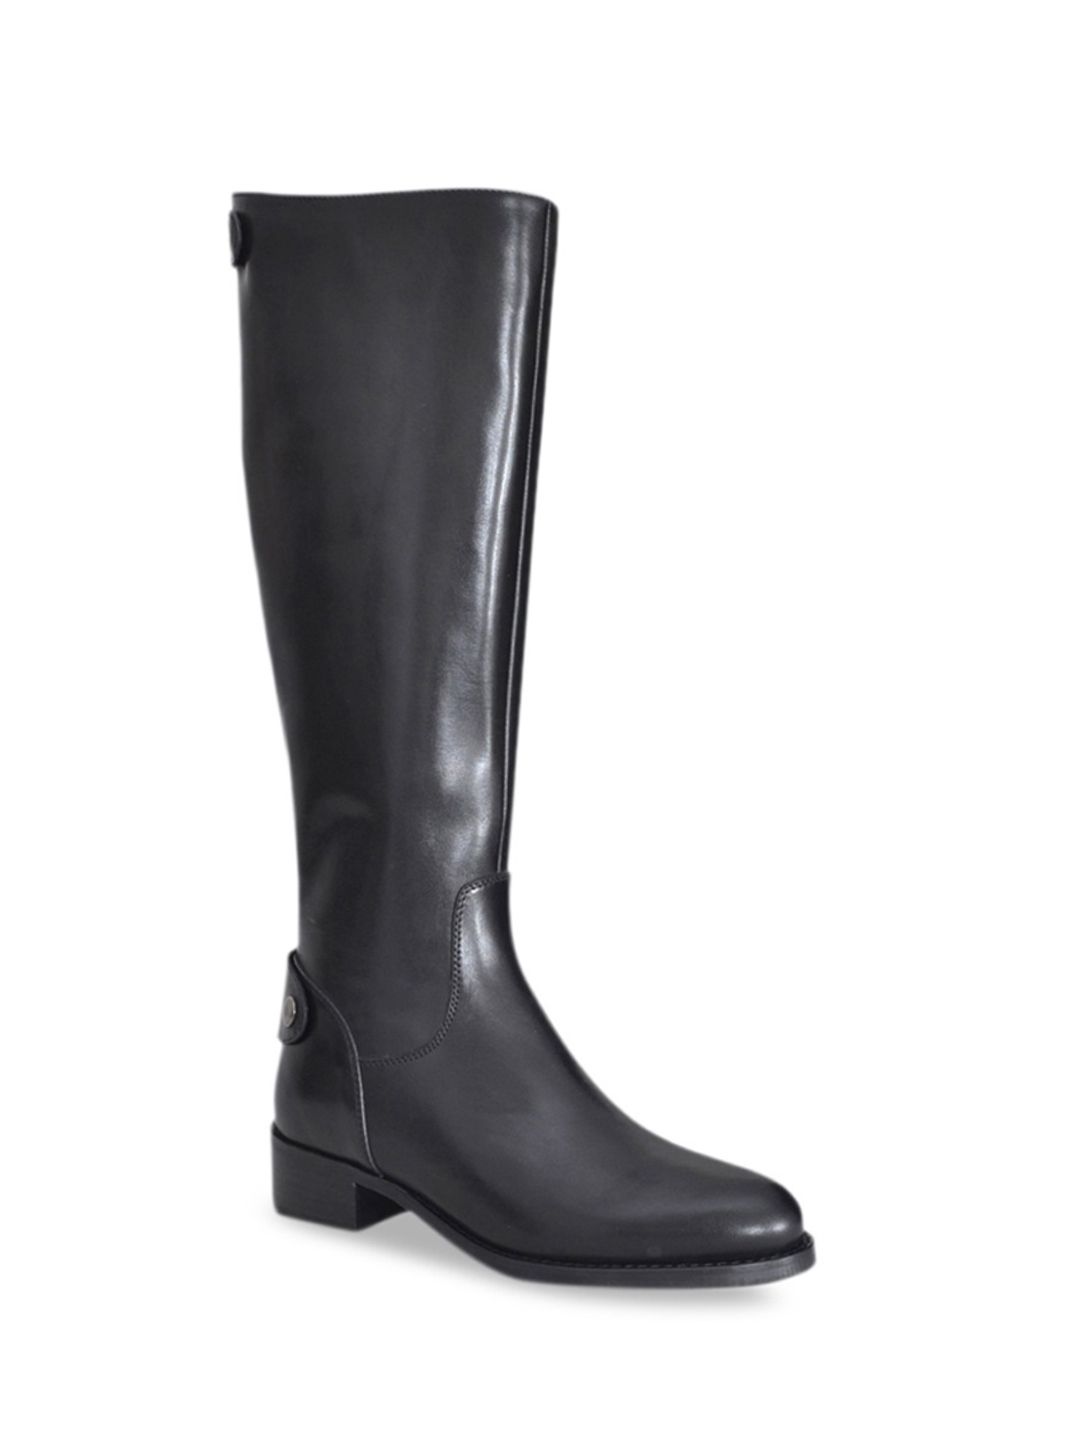 Saint G Womens Black Leather Knee High Boots Price in India